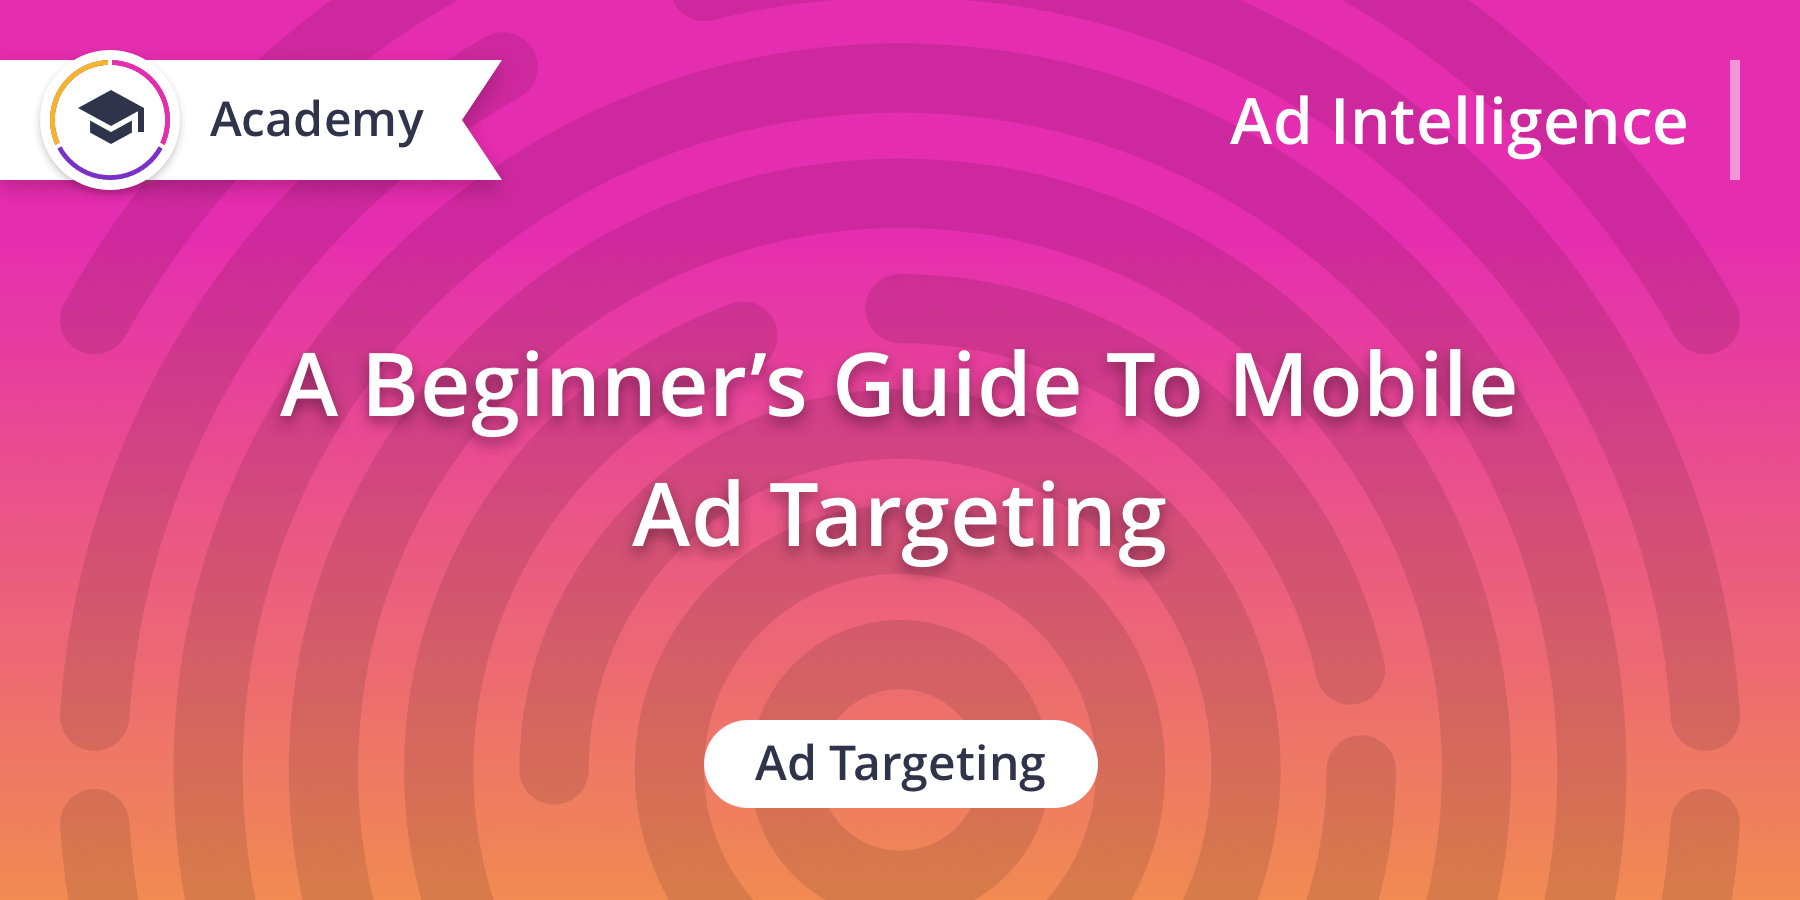 A Beginner’s Guide To Mobile Ad Targeting